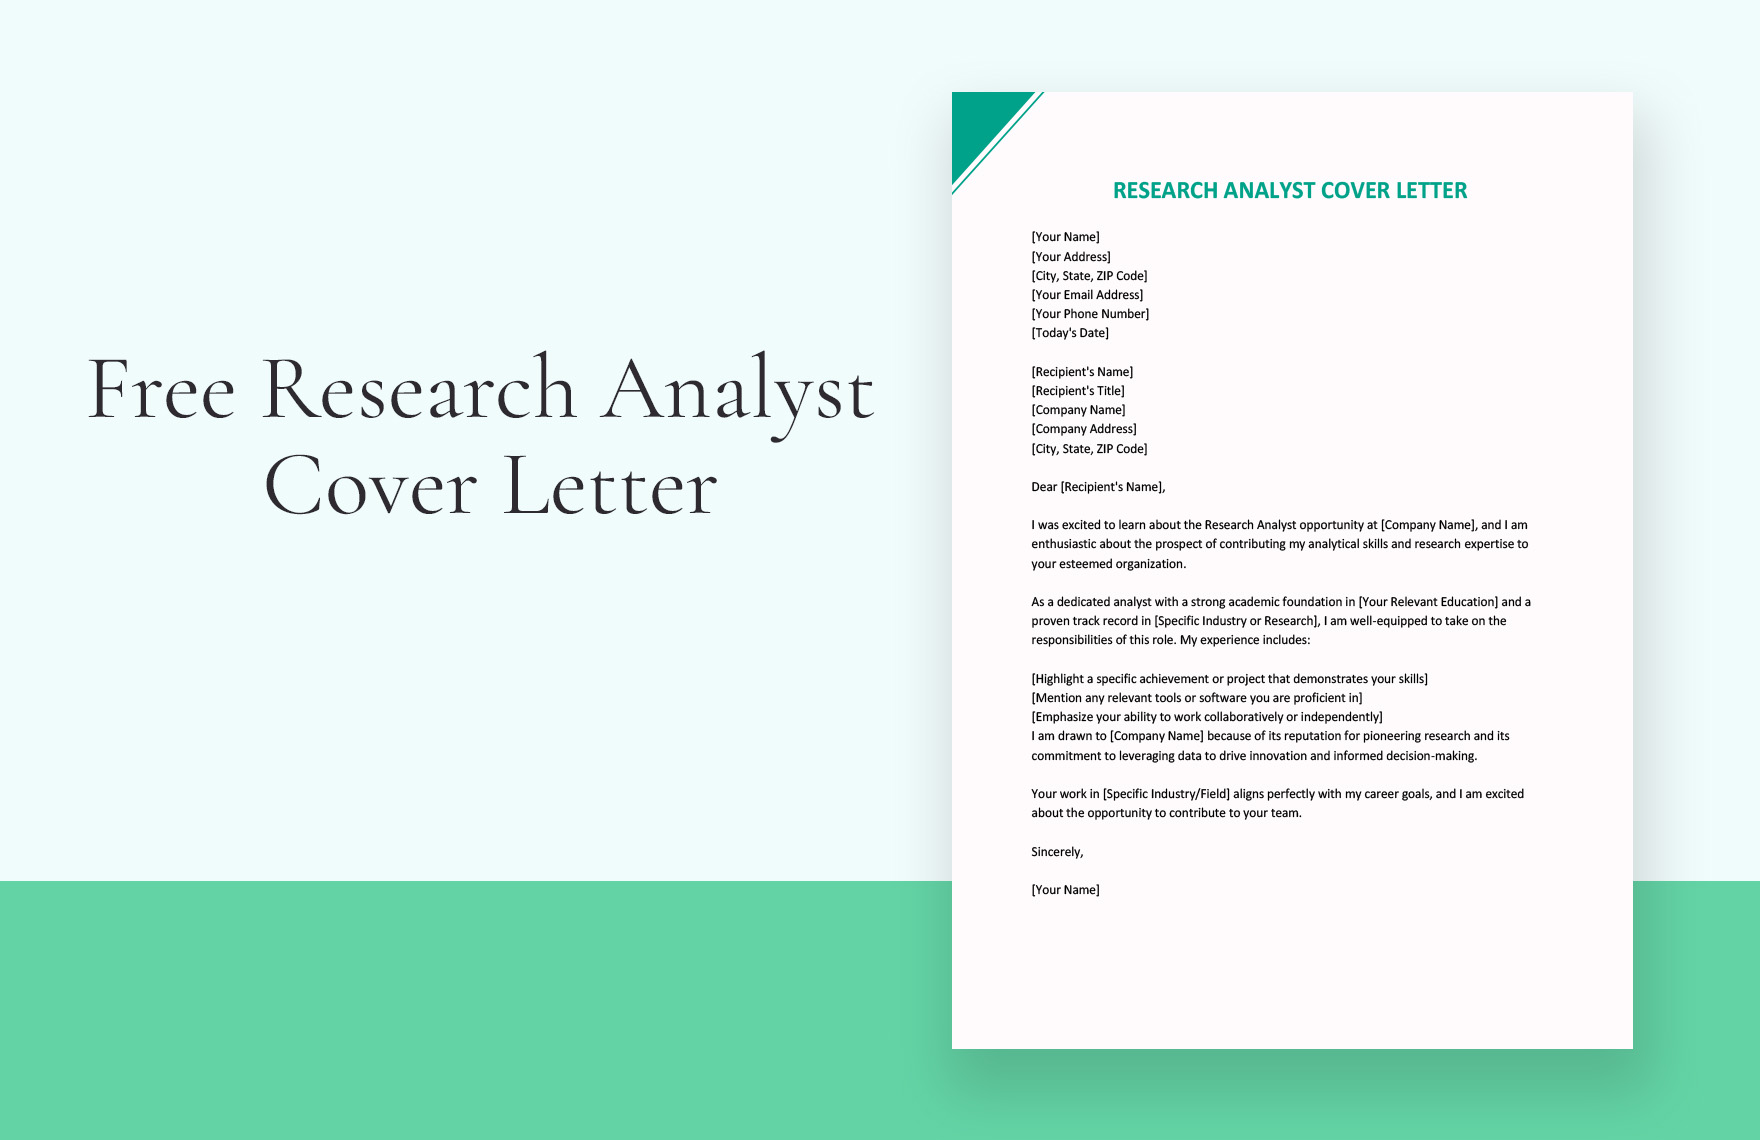 Research Analyst Cover Letter in Word, Google Docs